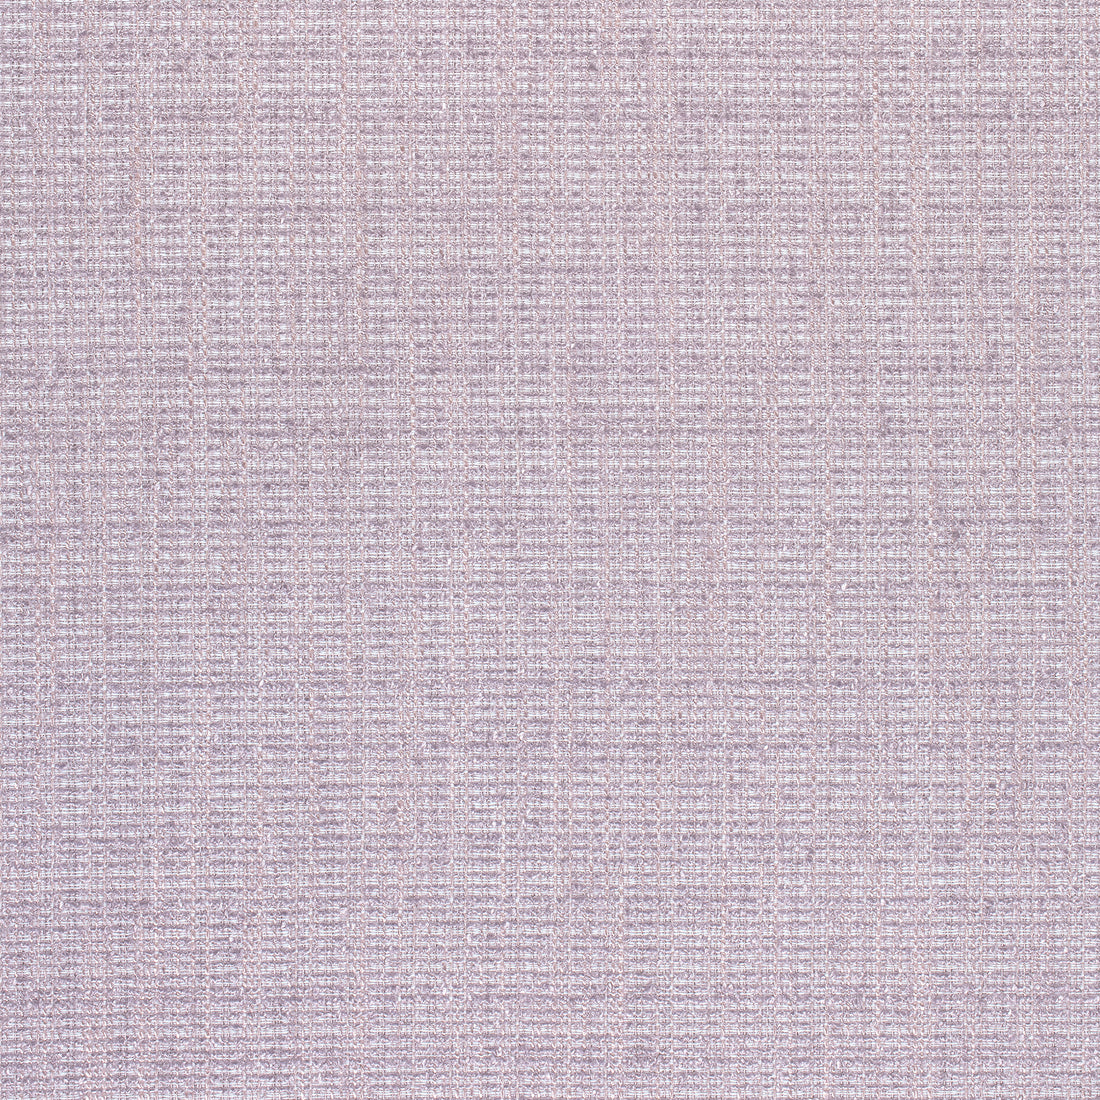 Avery fabric in lilac color - pattern number W789136 - by Thibaut in the Reverie collection